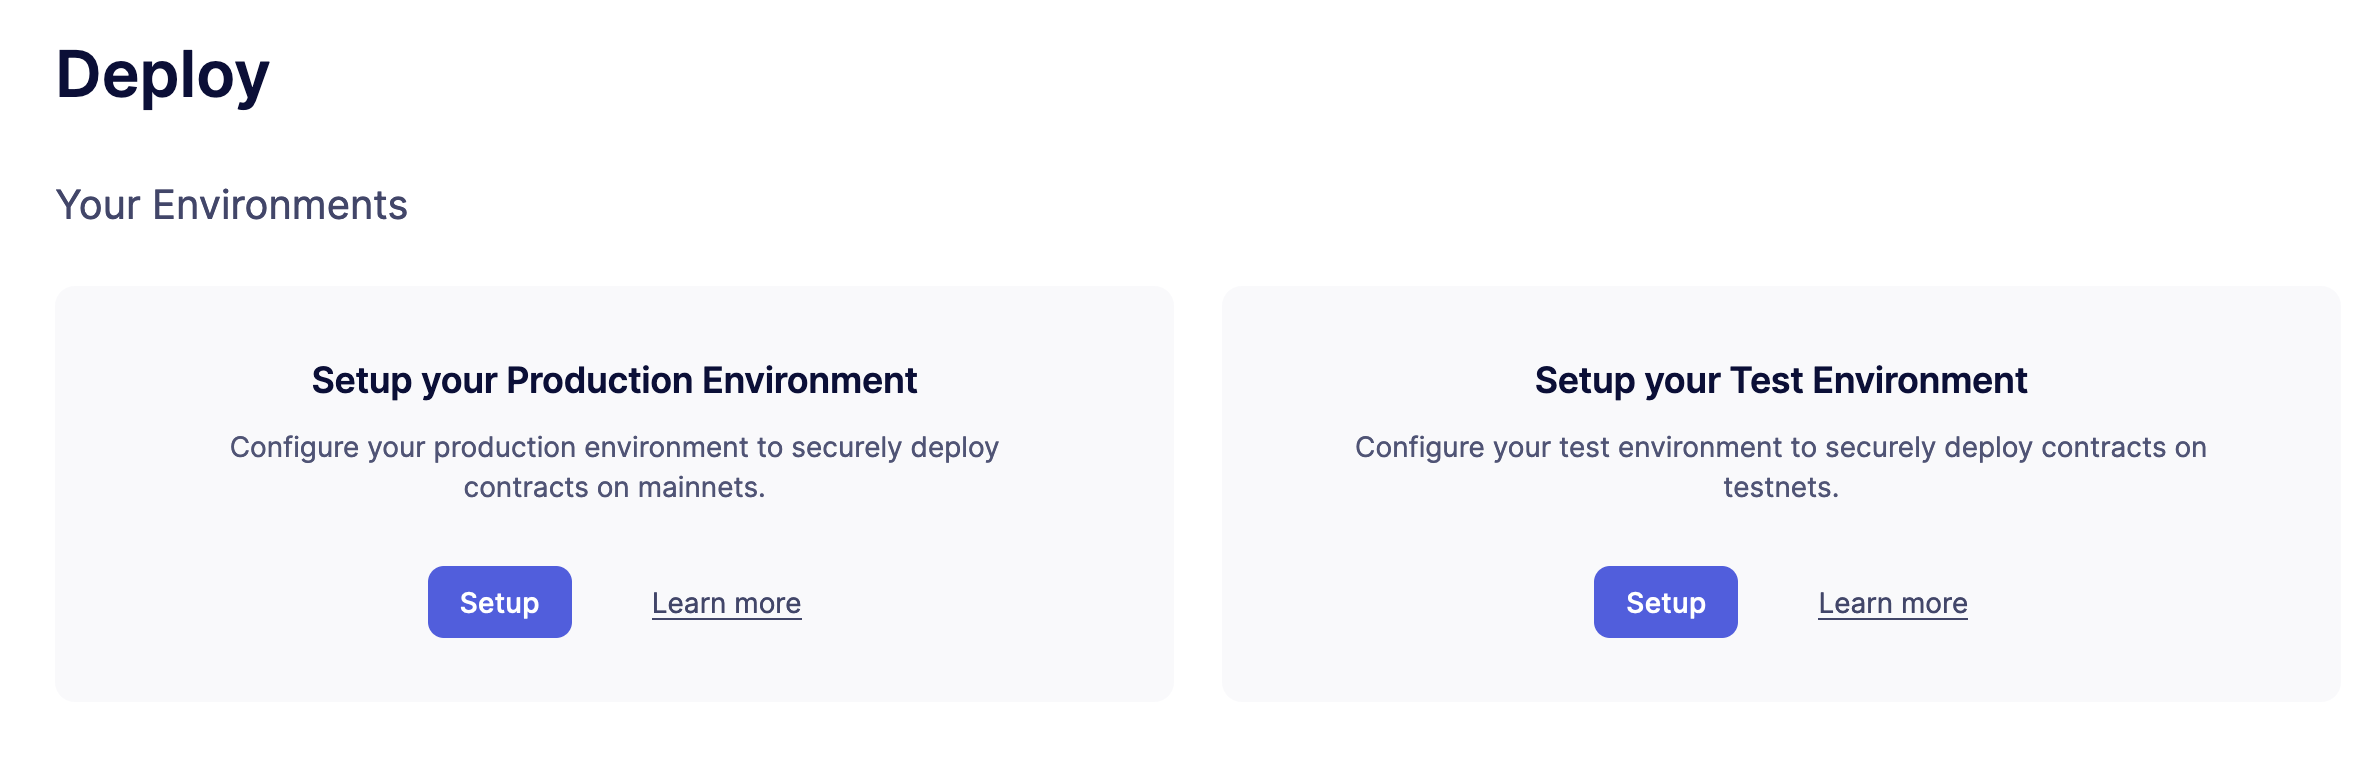 Deploy environments page